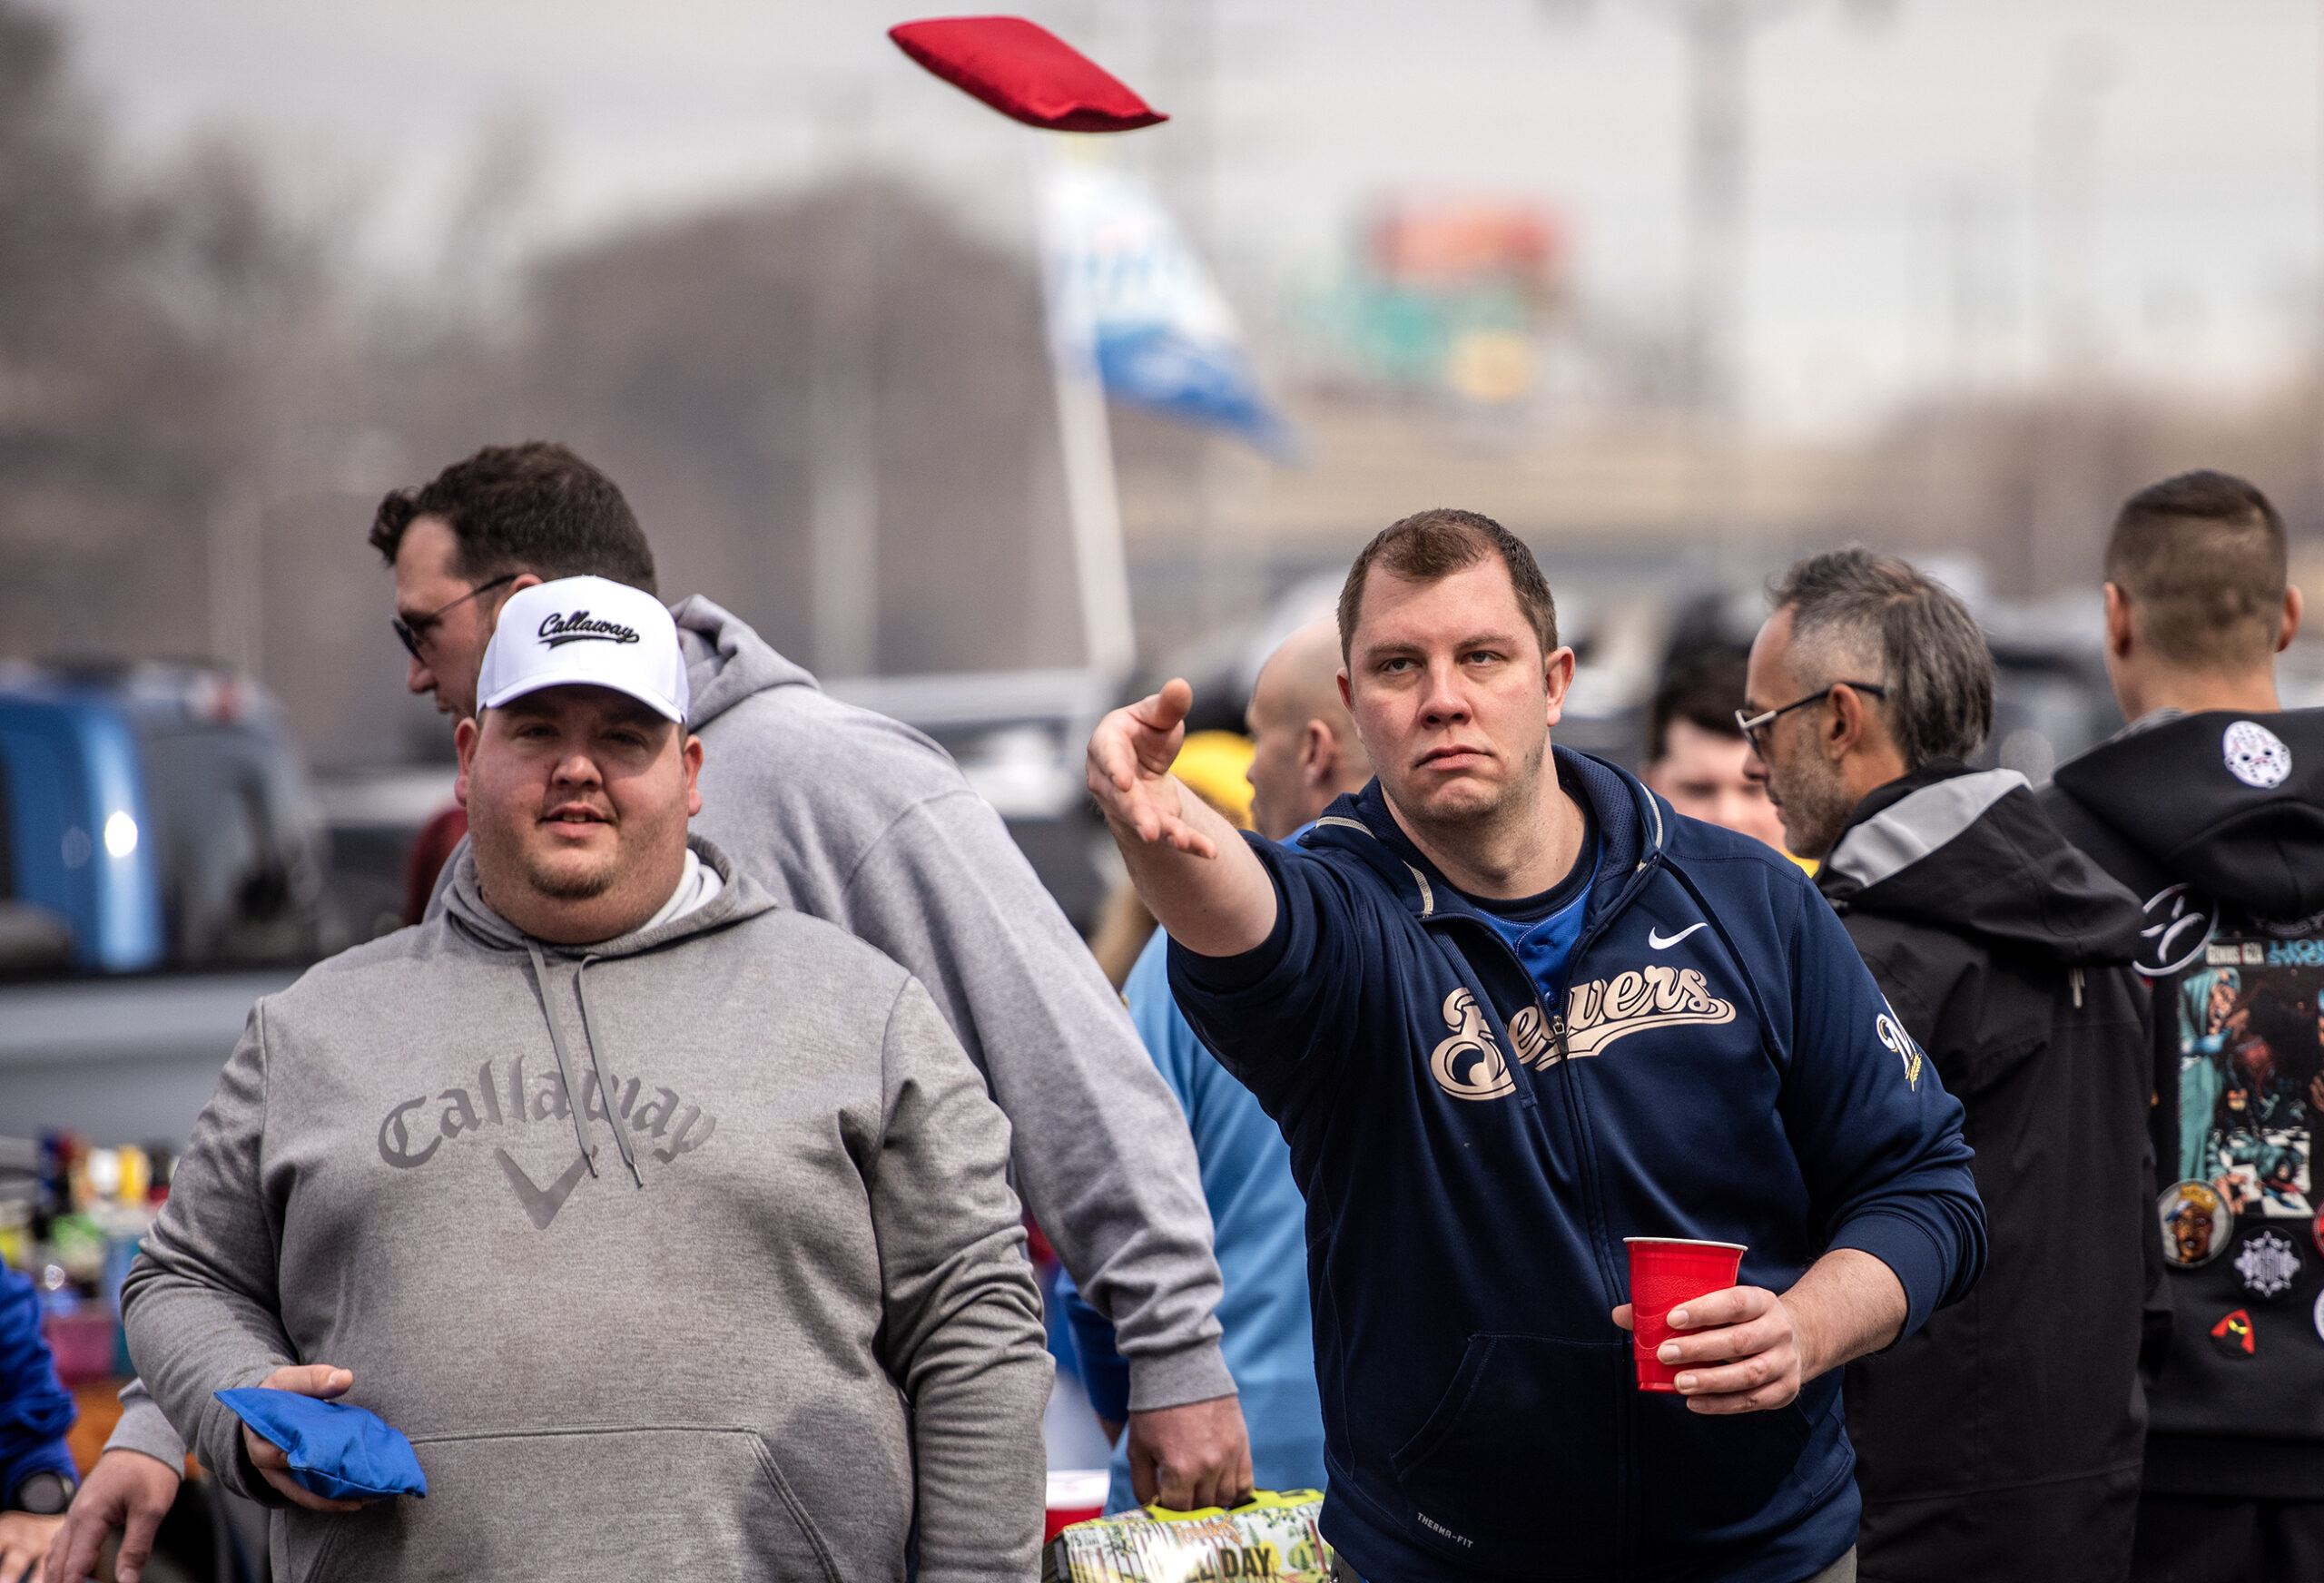 A man throws a red beanbag in the air while playing a game of bags outside as crowds of tailgaters stand around him.